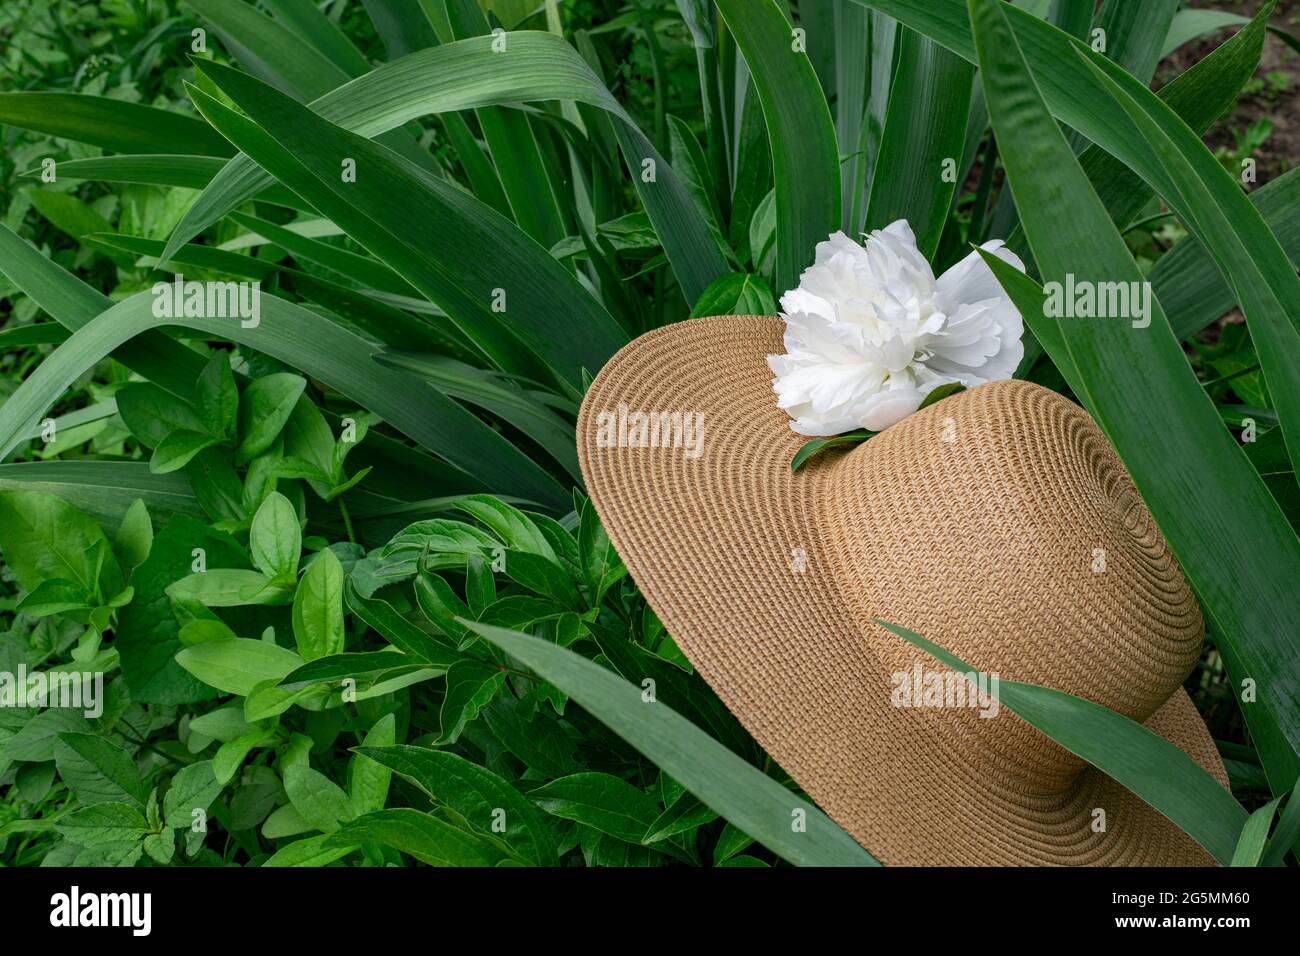 The hat is straw, decorated with white peony, forgotten in the garden on the grass. Stock Photo